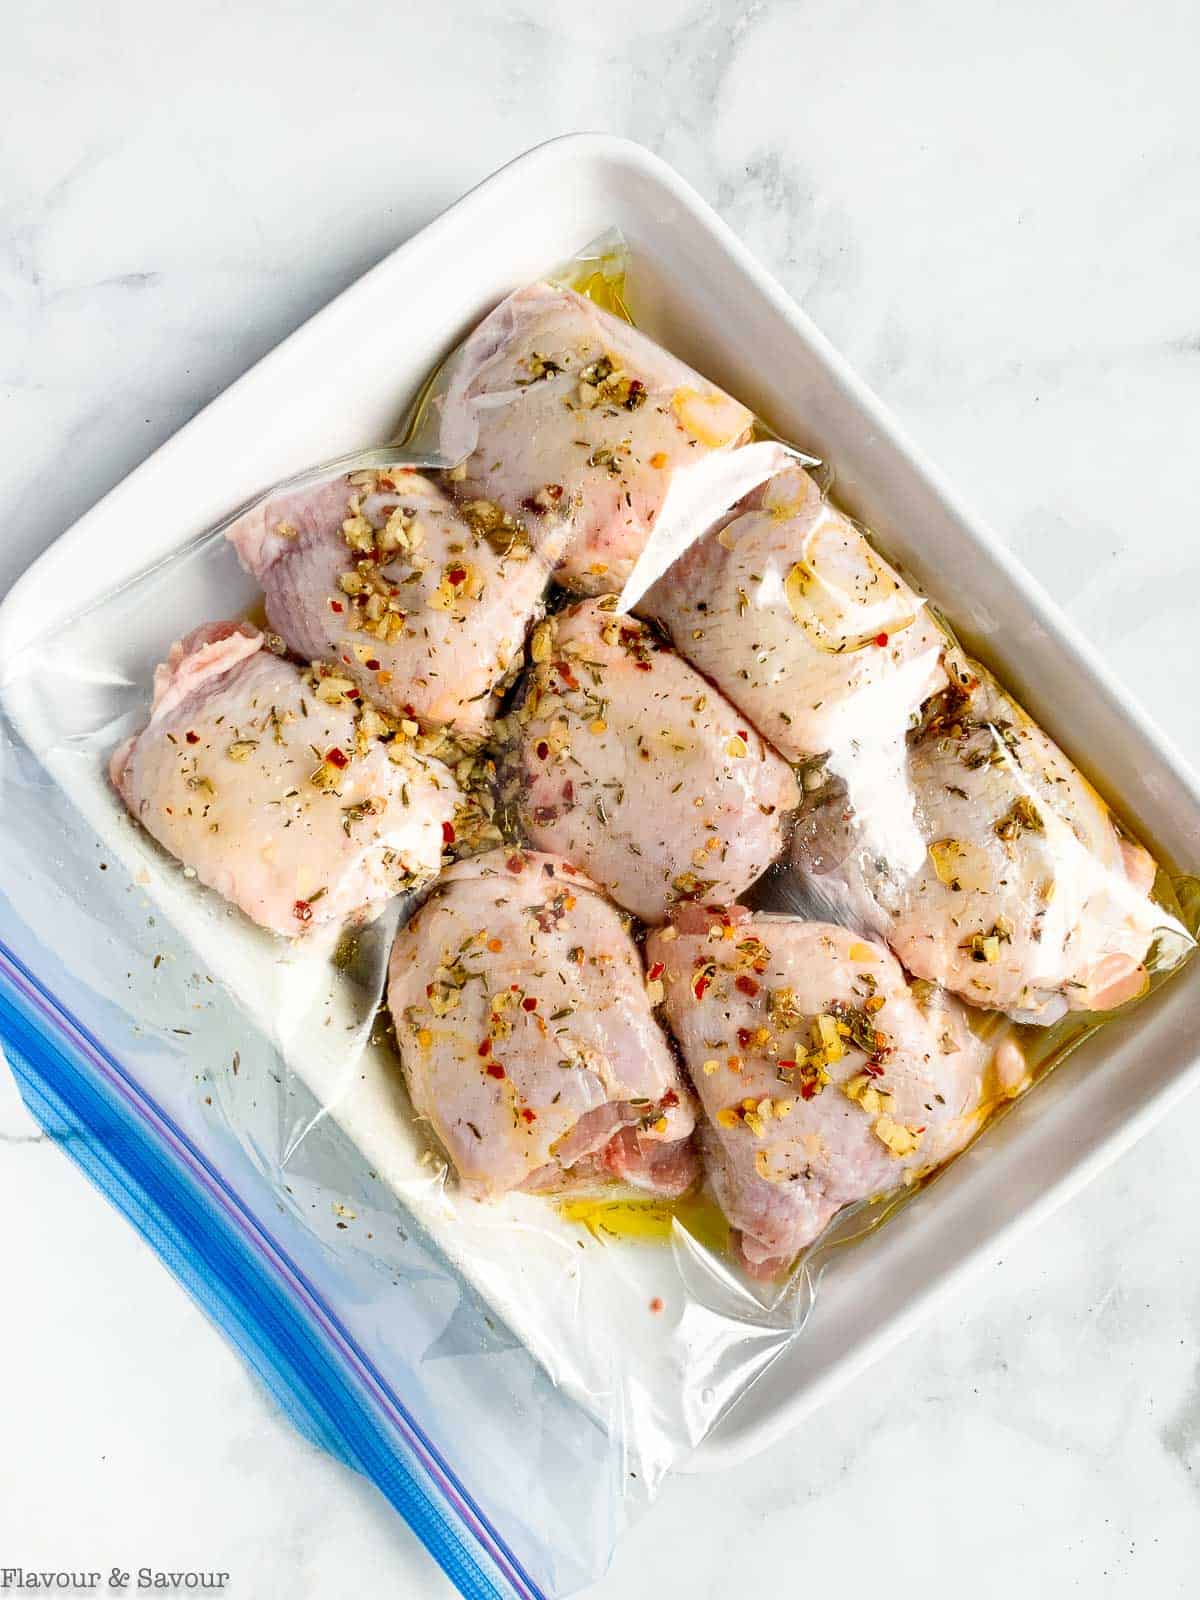 Chicken thighs with marinade in a resealable bag.